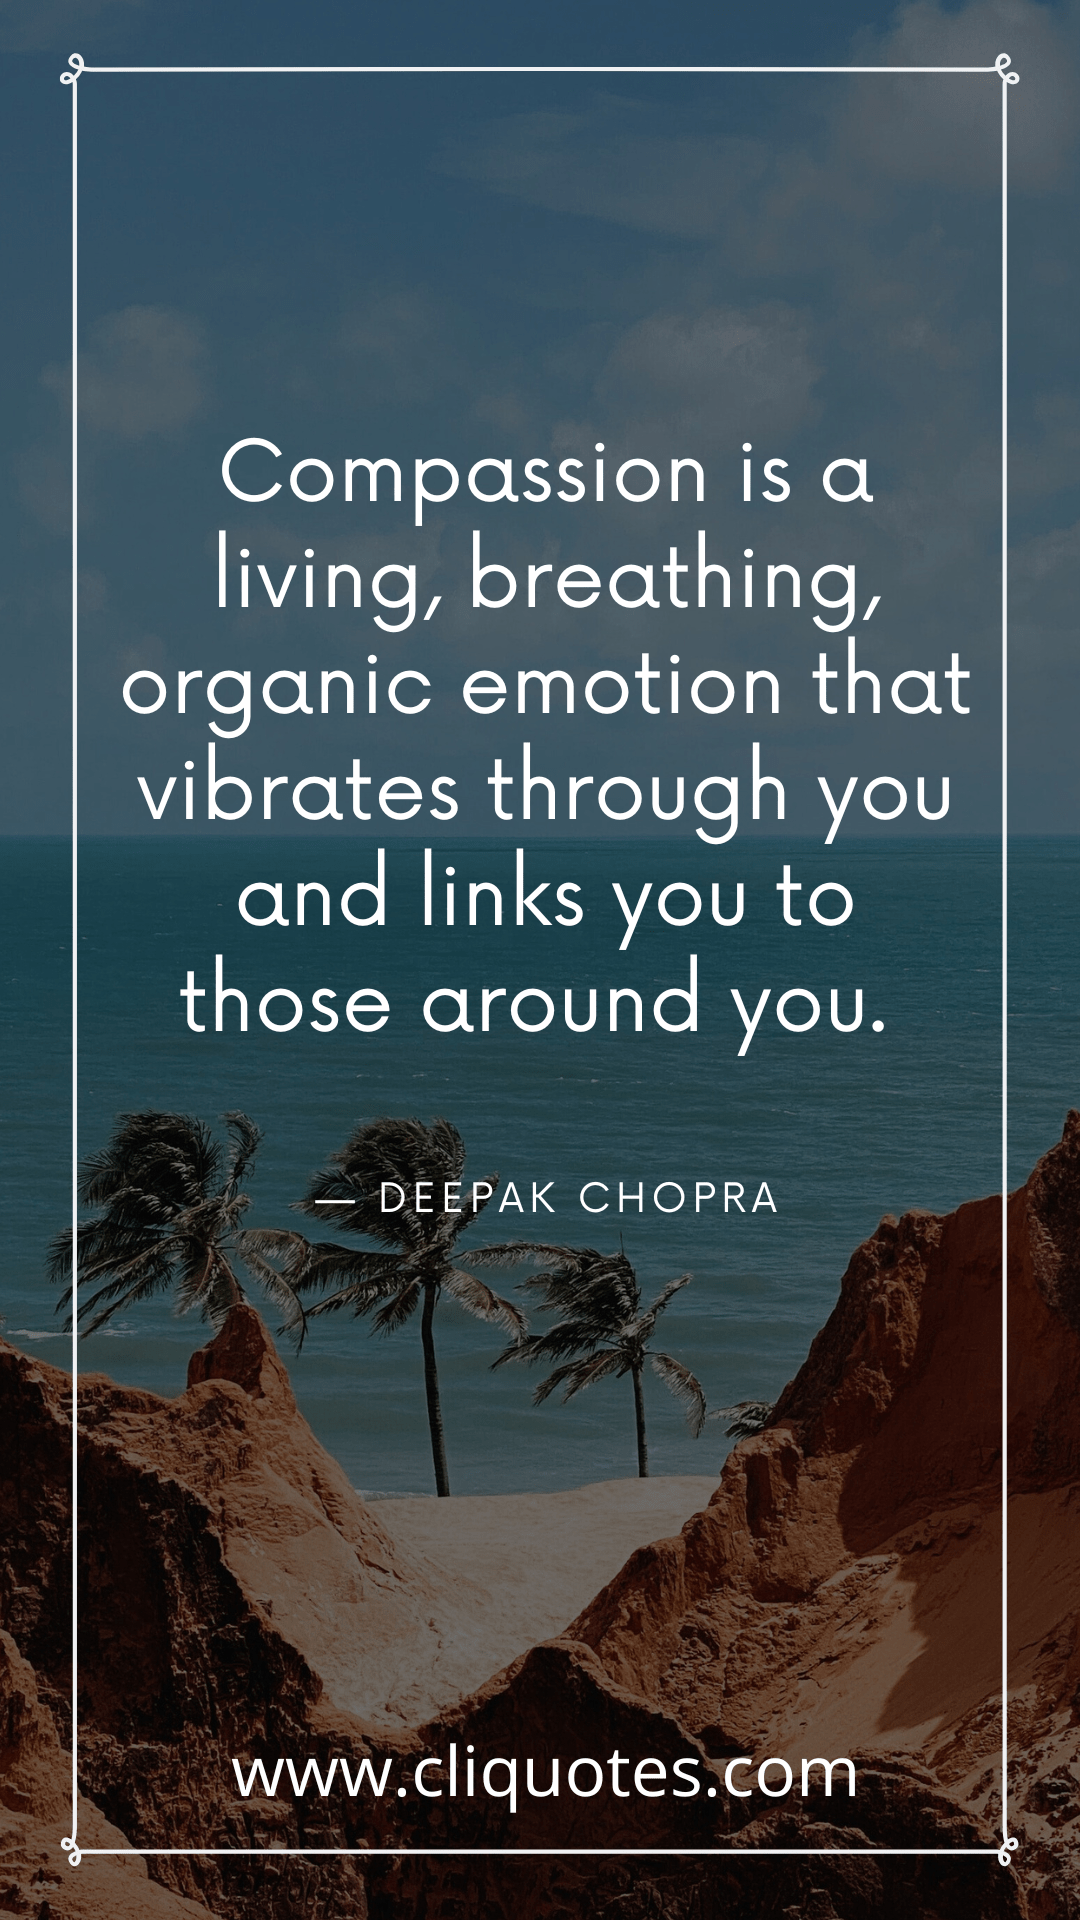 Compassion is a living, breathing, organic emotion that vibrates through you and links you to those around you. — DEEPAK CHOPRA